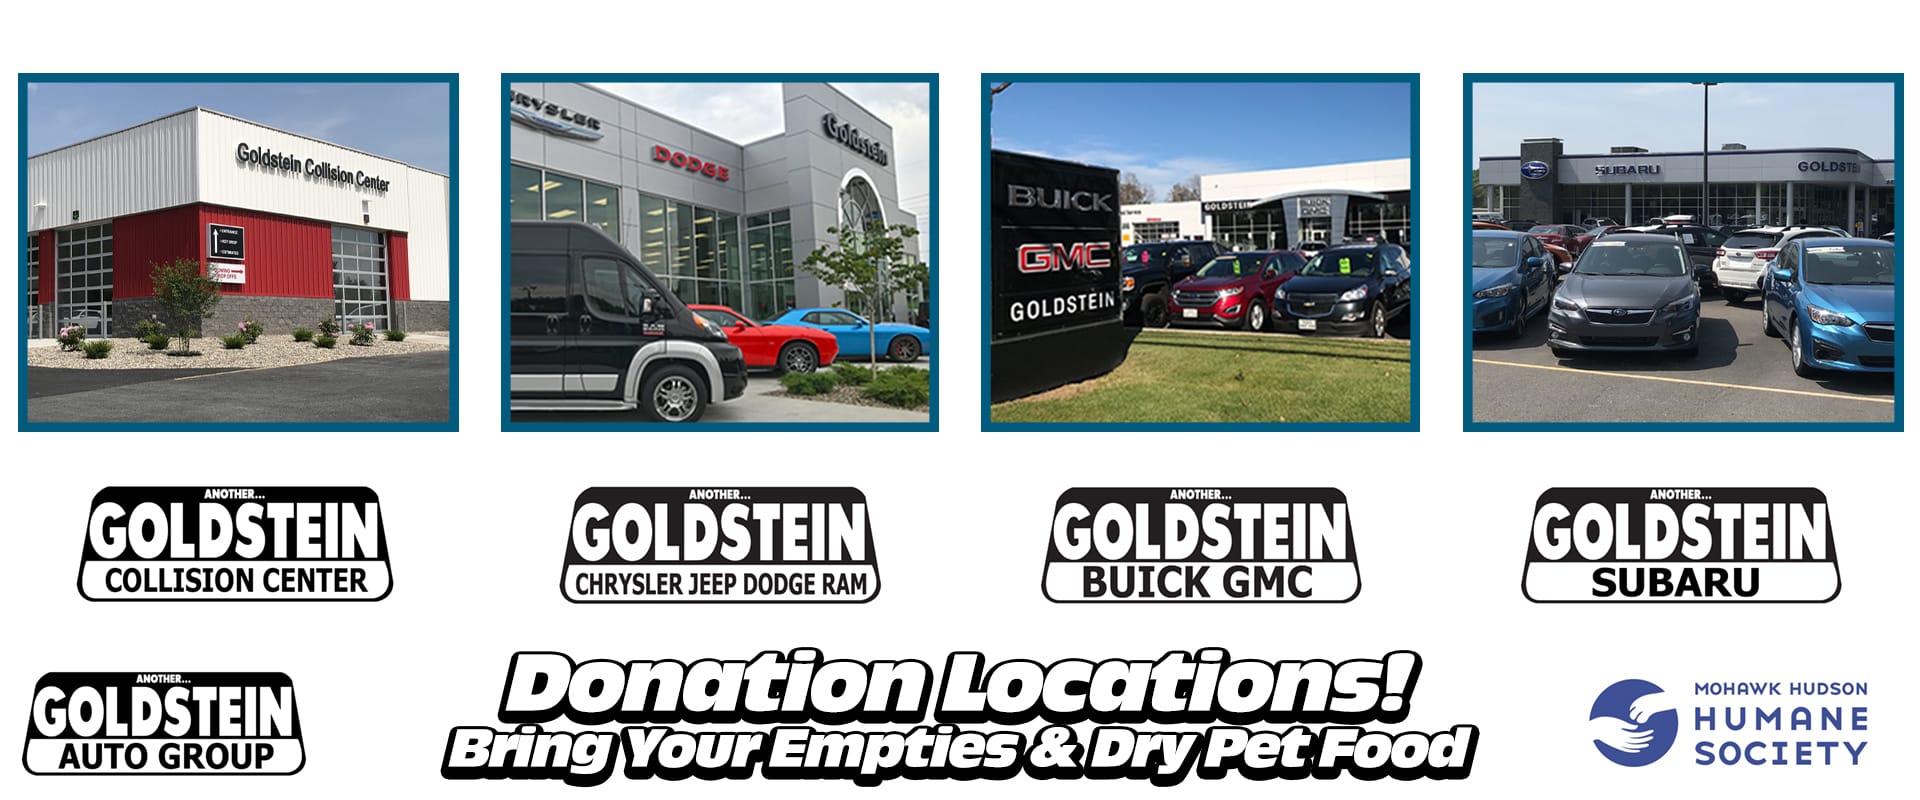 Goldstein Auto Group and Mohawk Hudson Humane Society donation locations